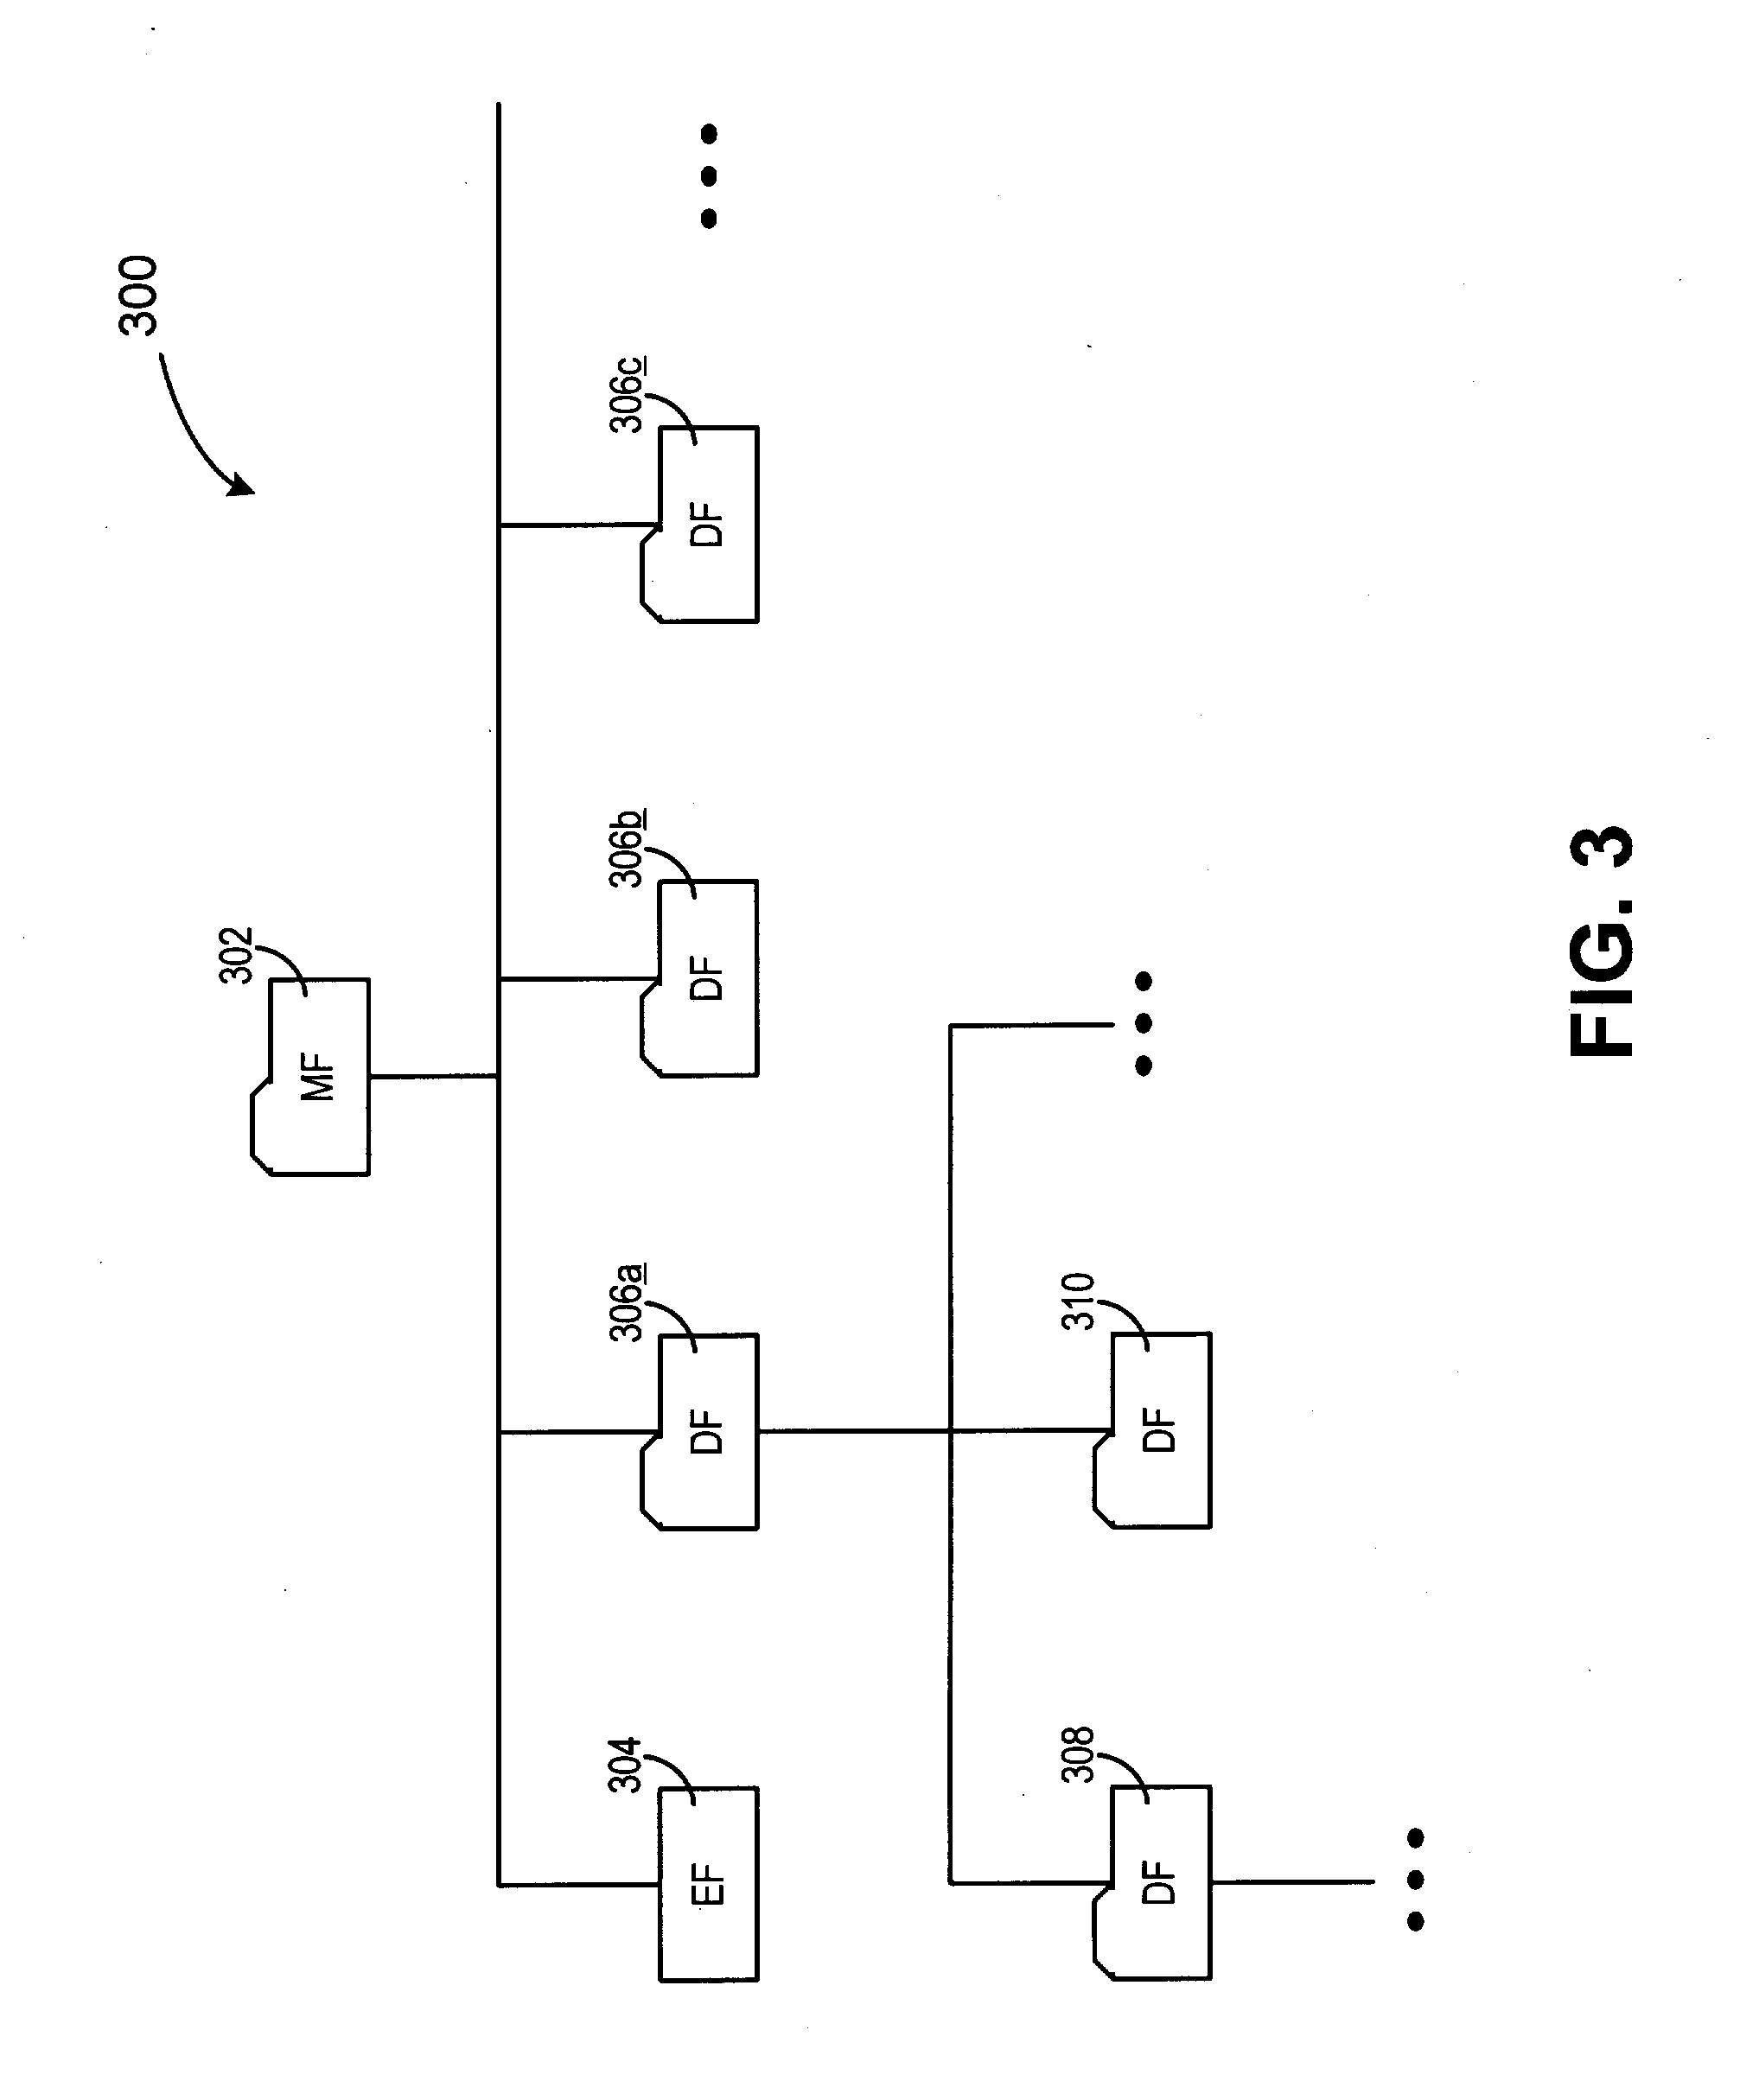 Method and system for proffering multiple biometrics for use with a smartcard